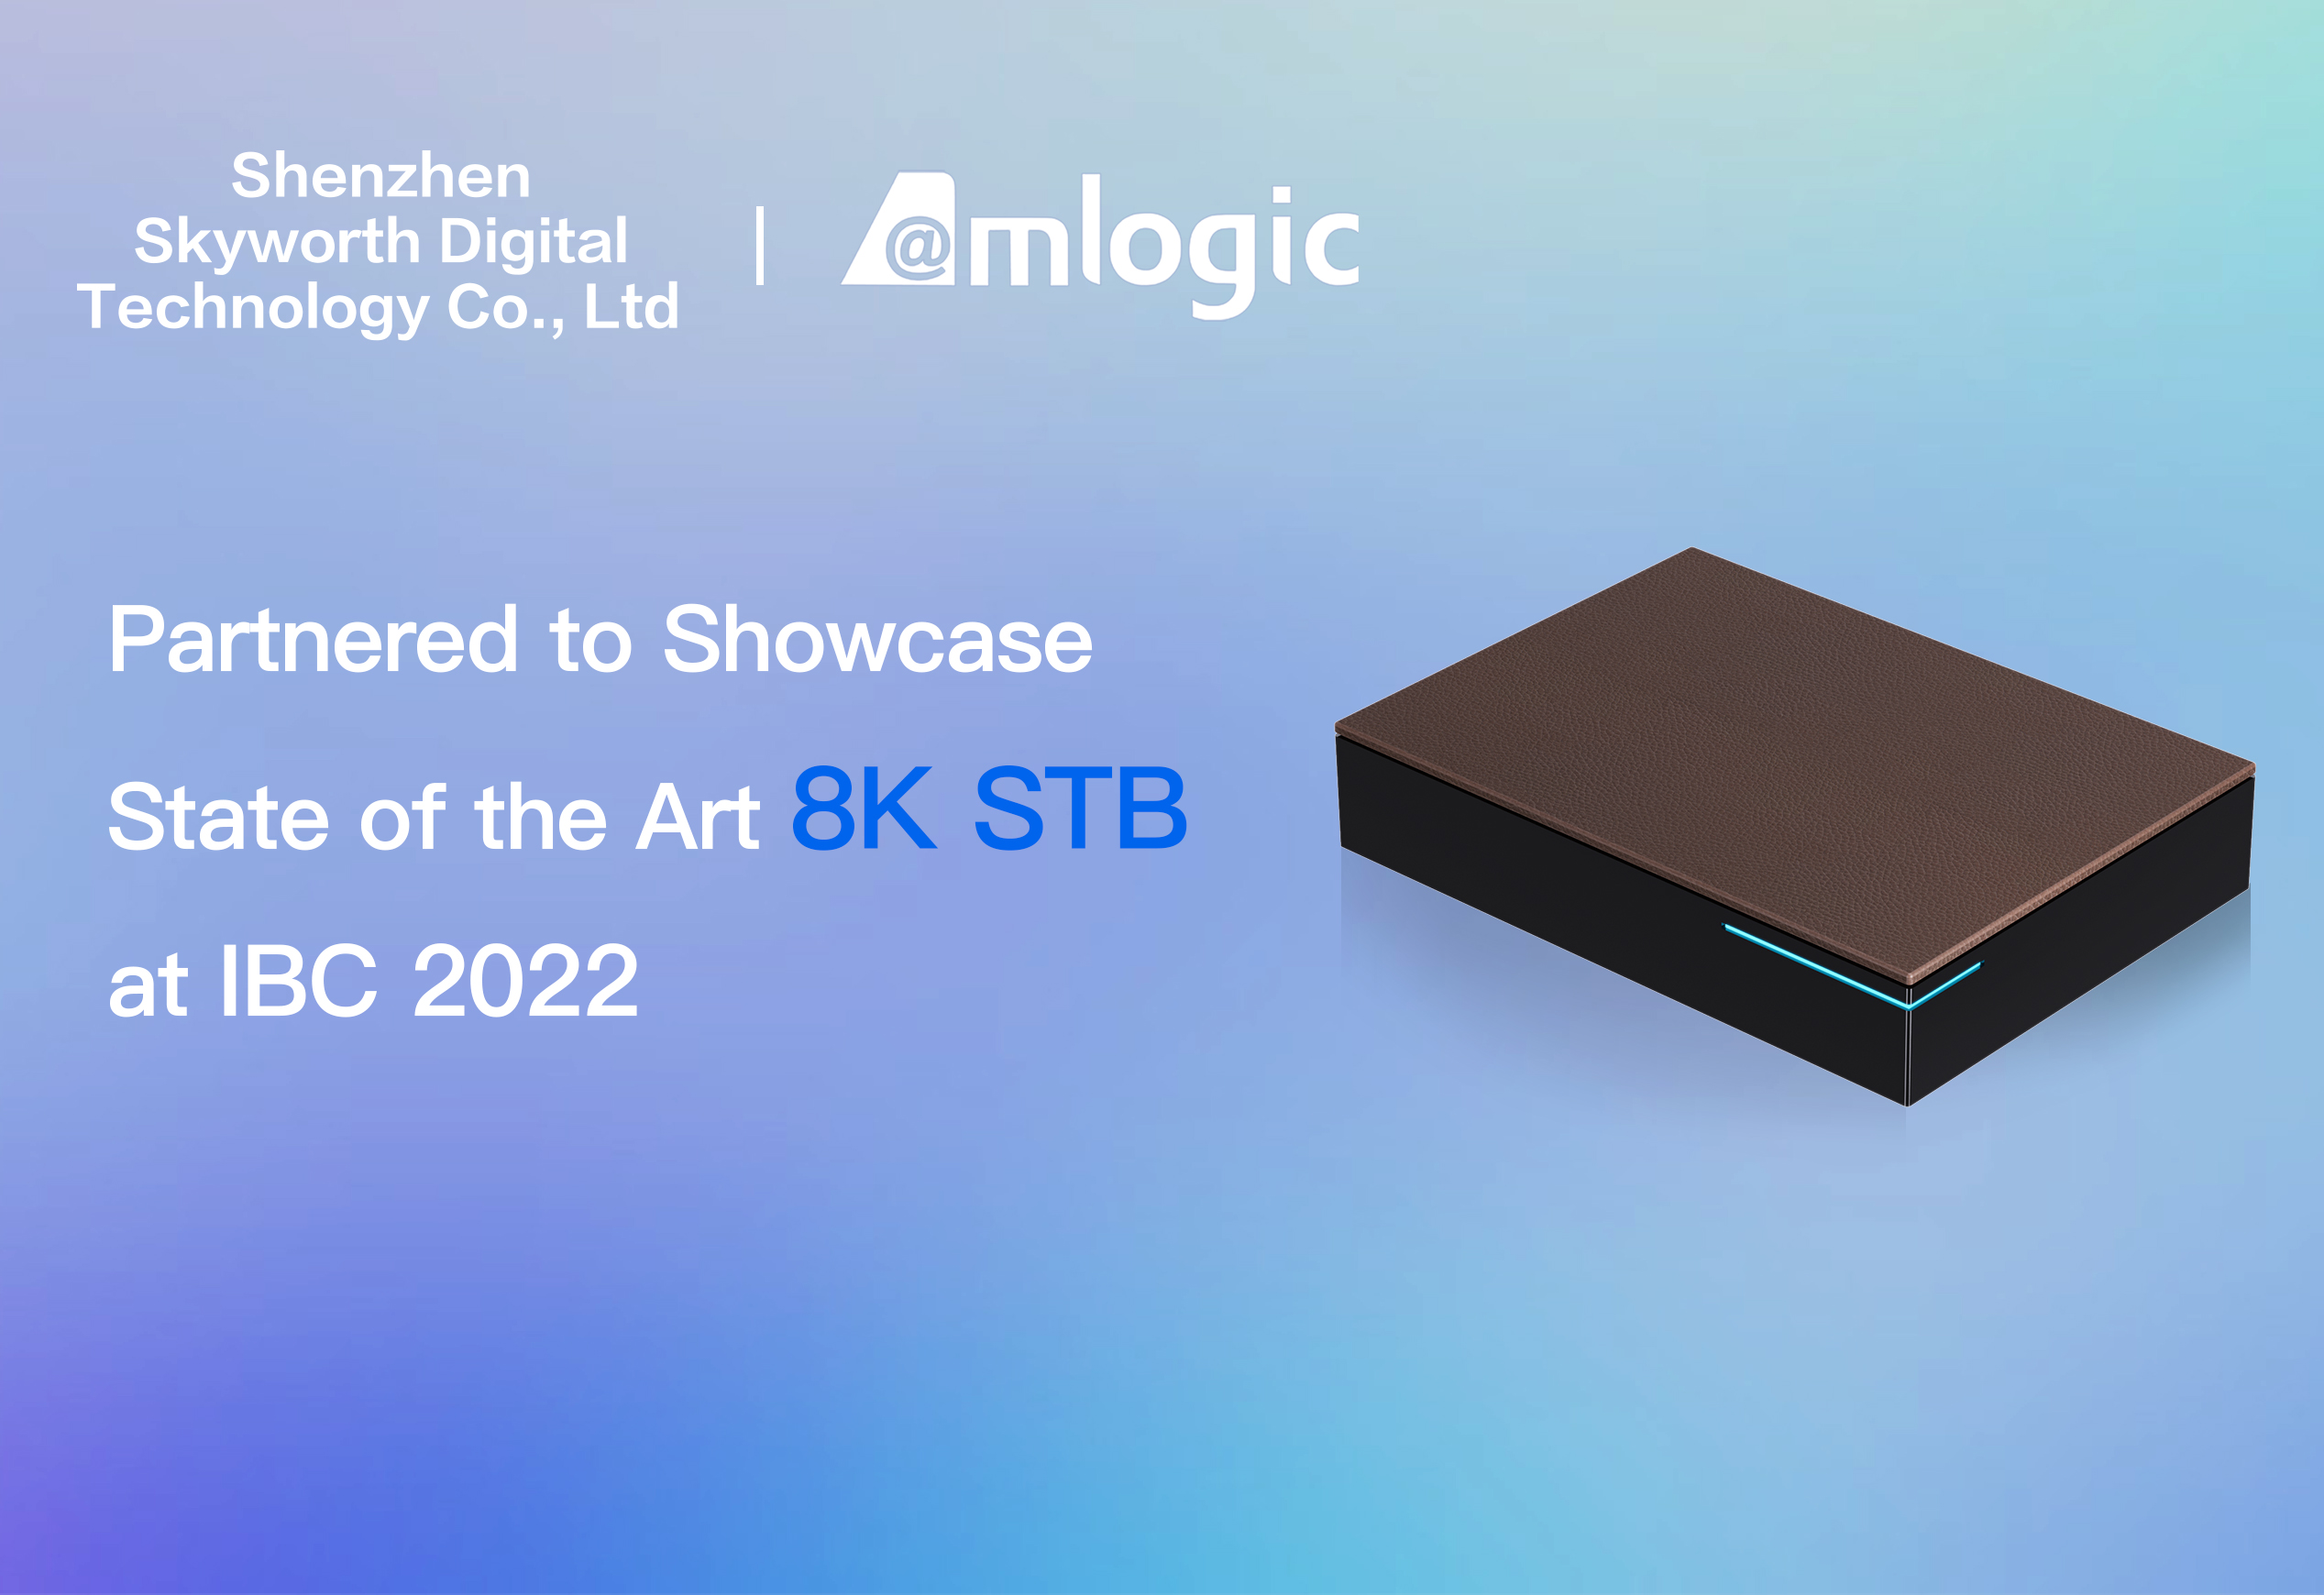 Shenzhen Skyworth Digital Technology Company Limited Partners with Amlogic to Showcase State of the Art 8K Set-Top Box at IBC 2022